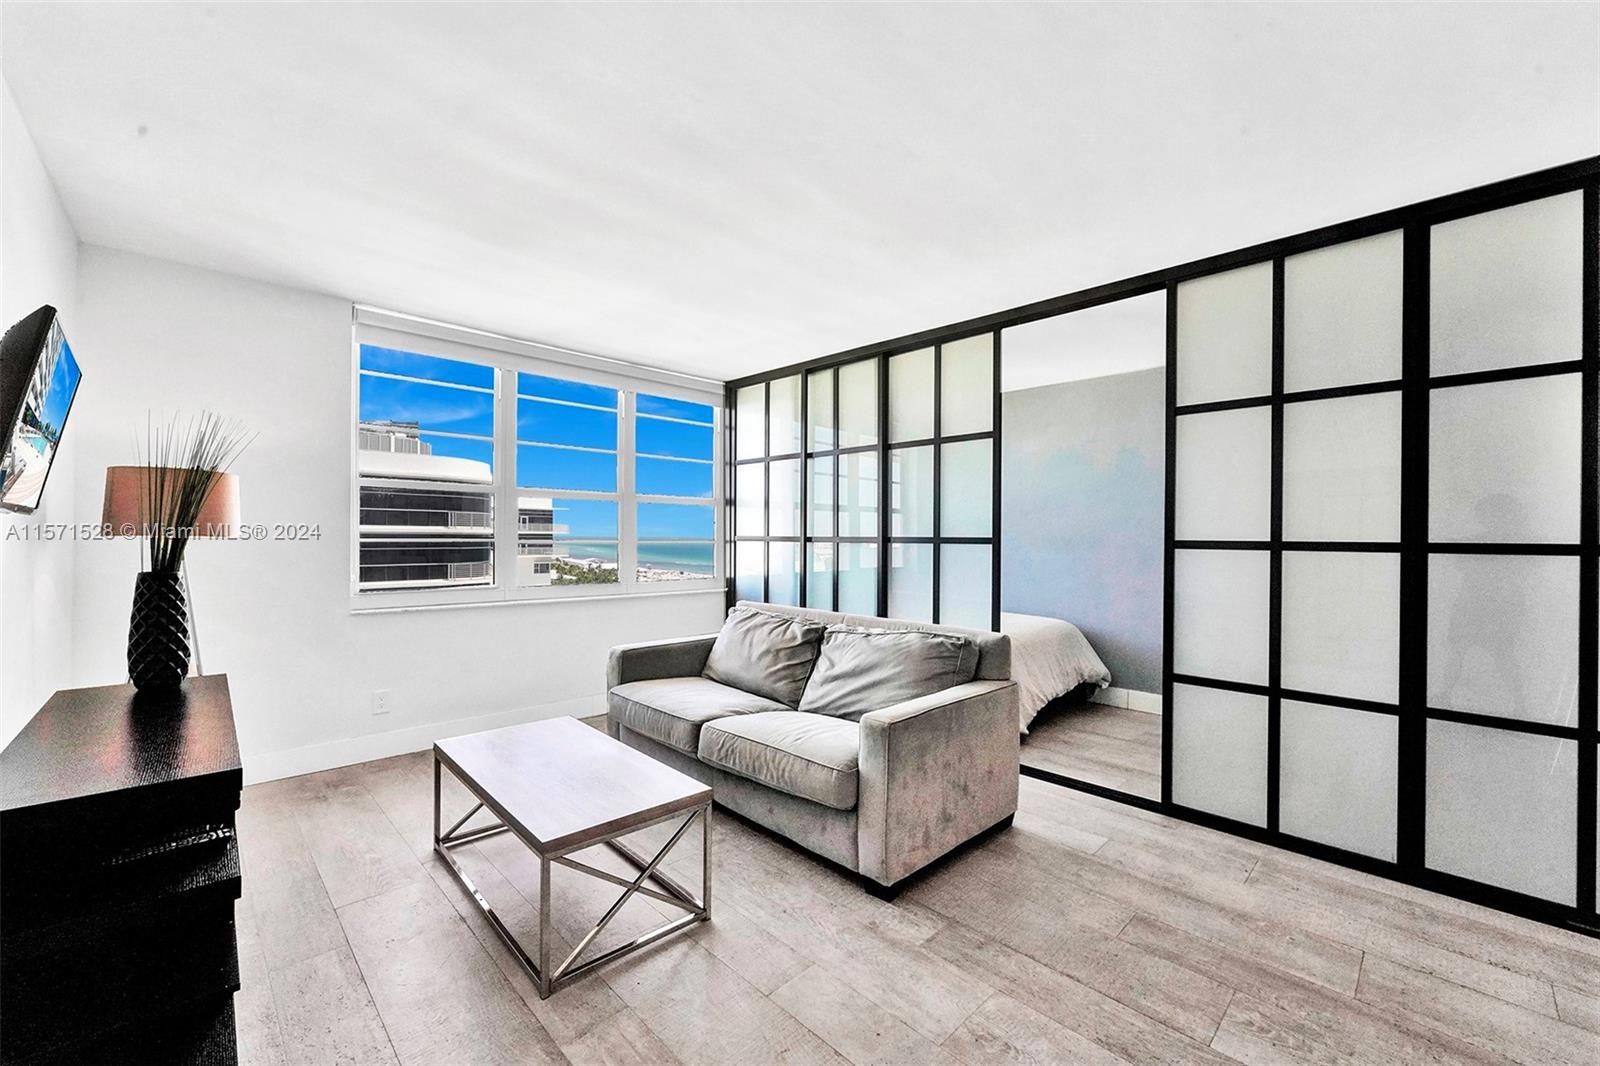 Substantially remodeled Jr 1 bedroom with OCEAN VIEW! This unit features modern wood porcelain floor